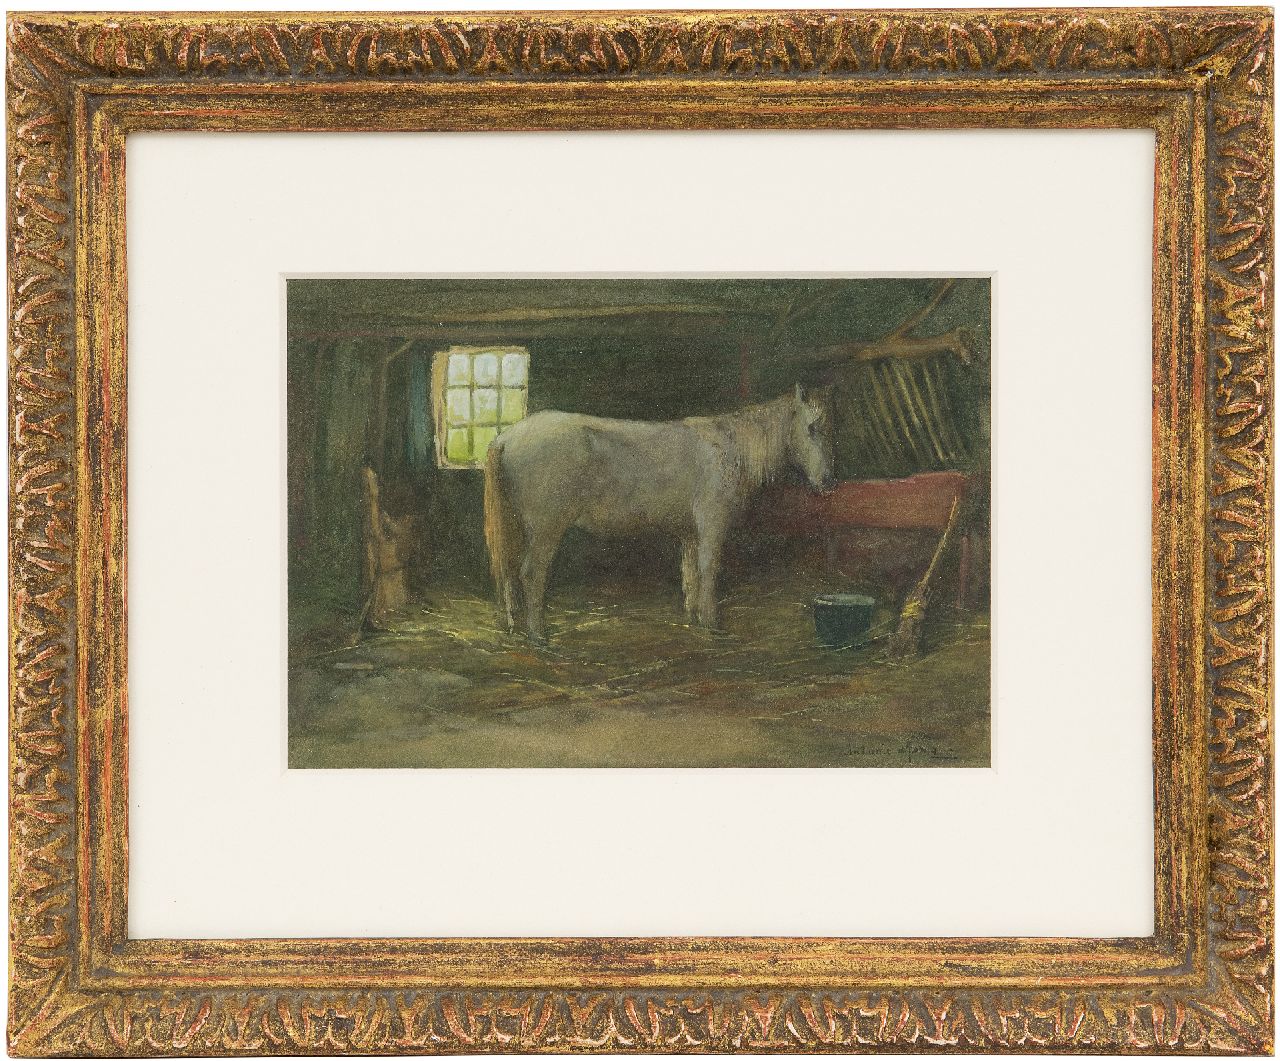 Jong A.G. de | 'Antonie' Gerardus de Jong | Watercolours and drawings offered for sale | A grey in its stable, watercolour on paper 13.6 x 19.6 cm, signed l.r.